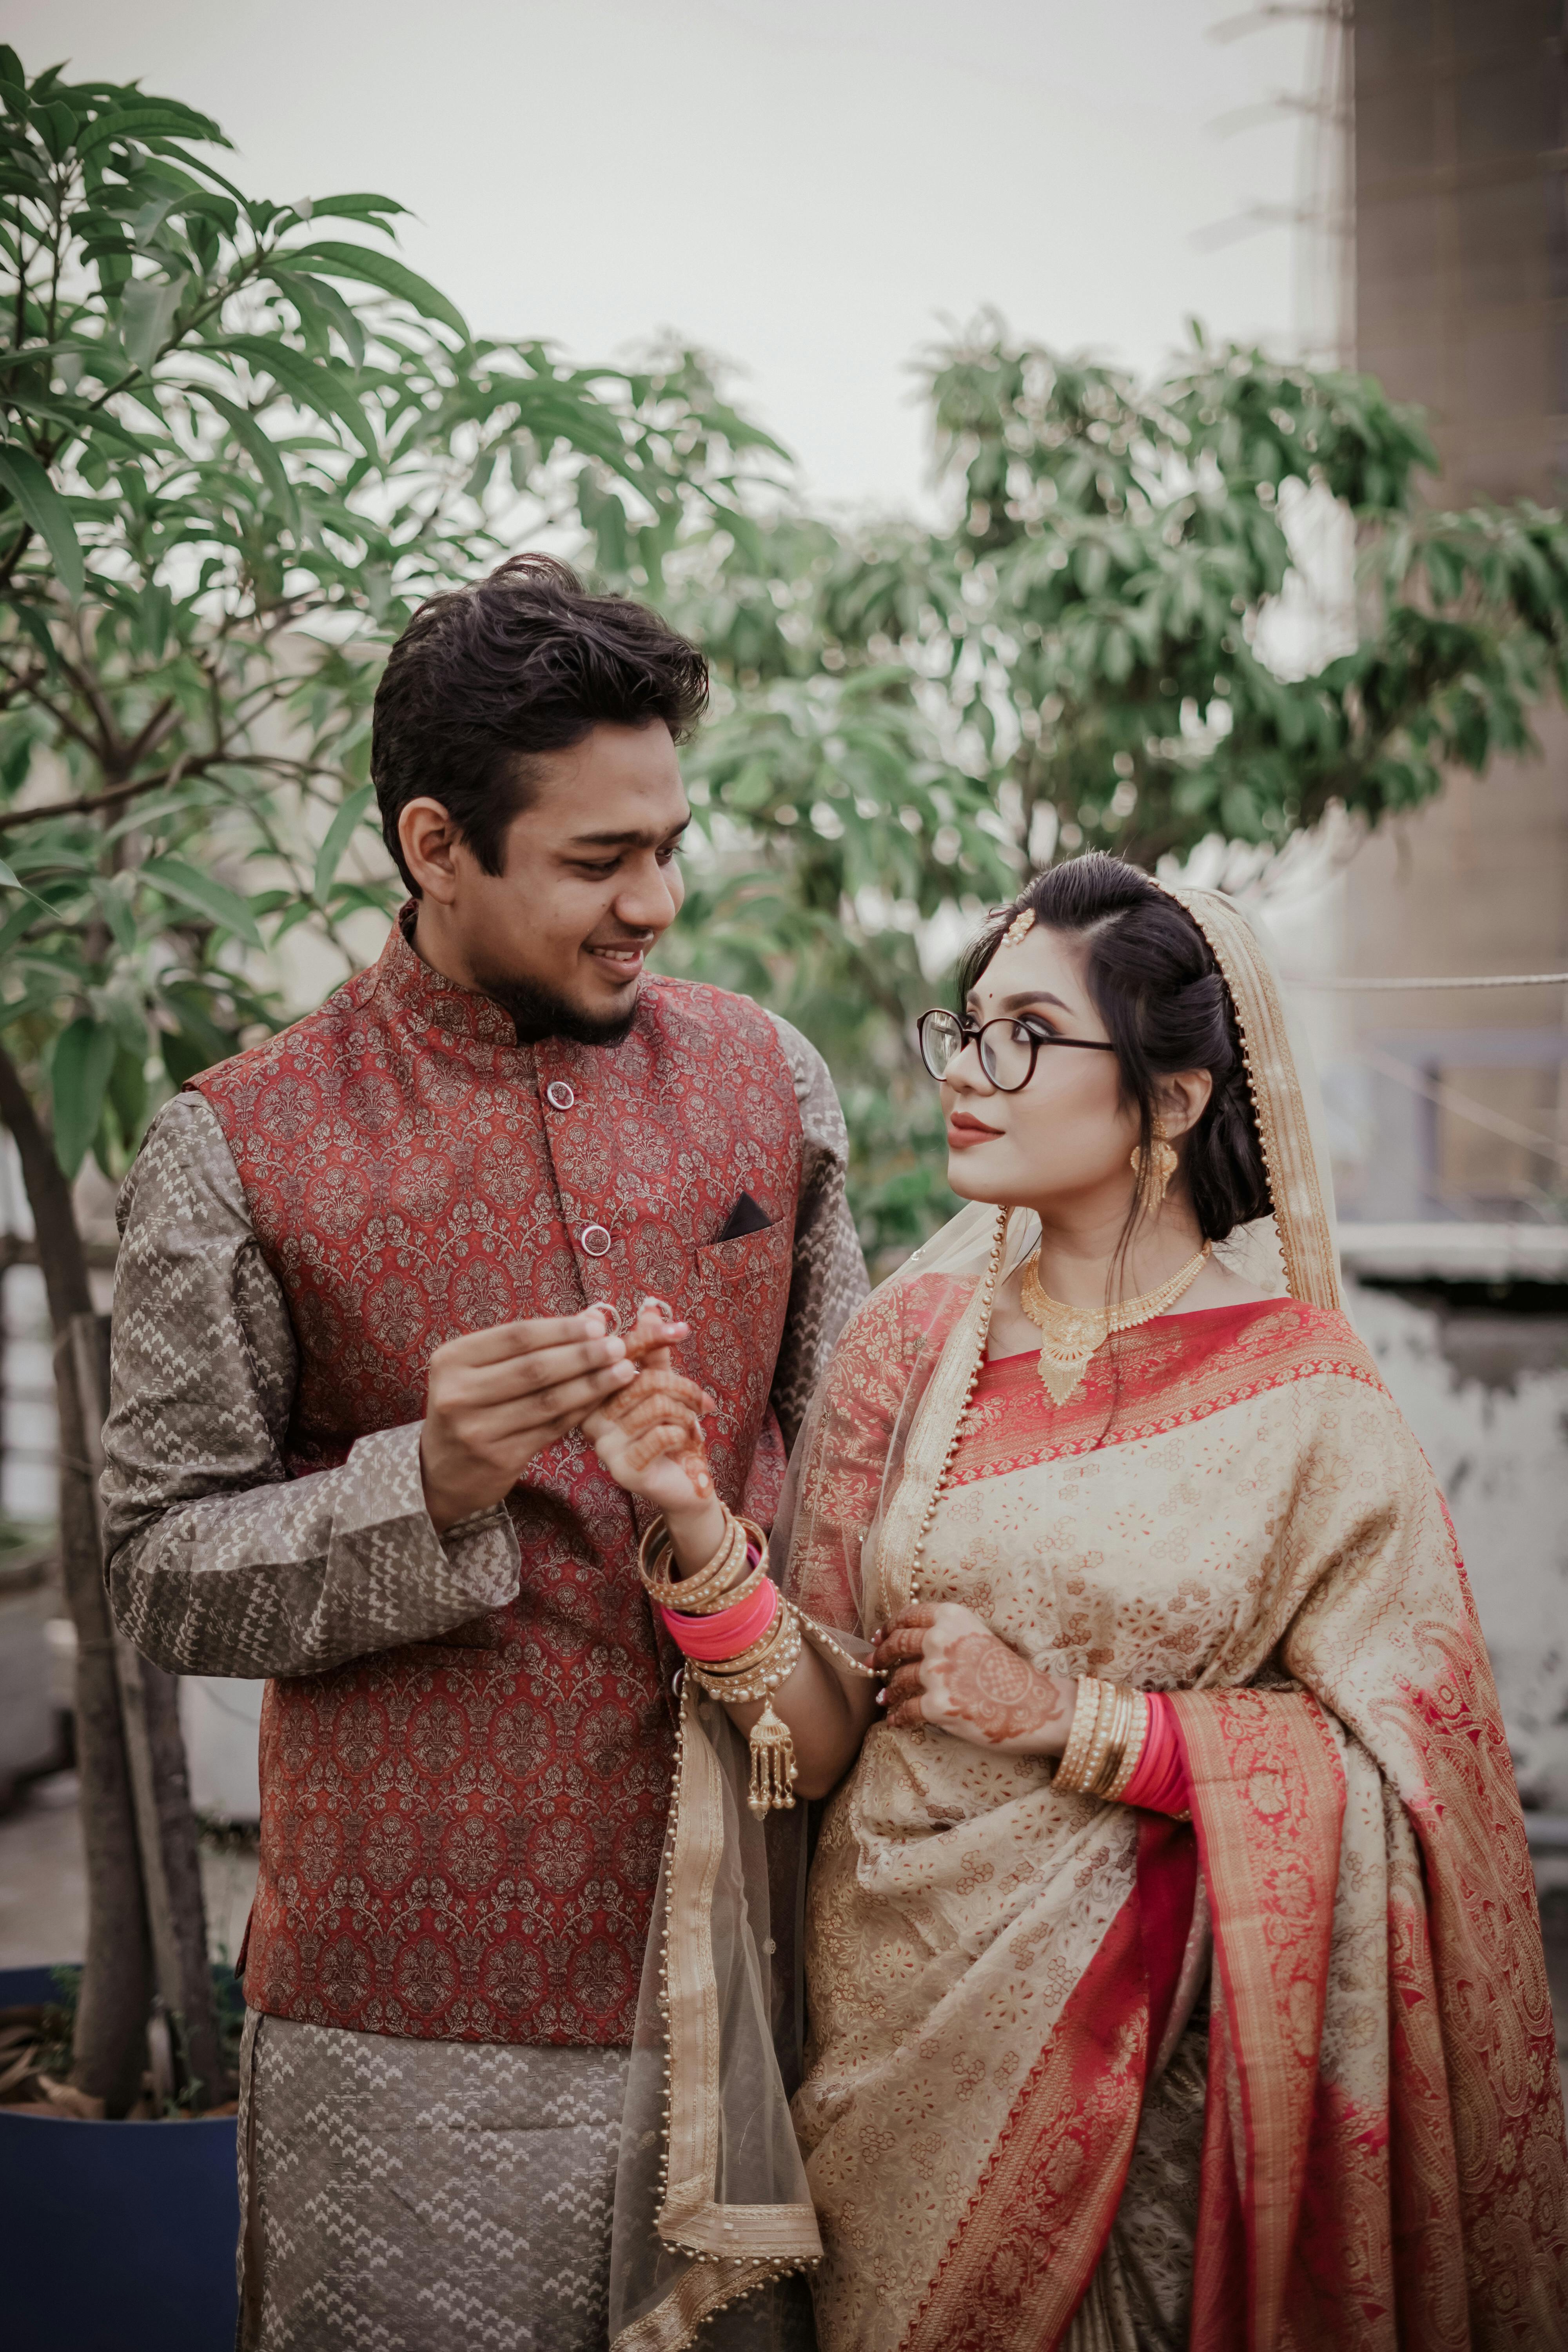 Free Images : best, traditional, photography, bride, marriage, ceremony,  fashion accessory, jewellery, event, tradition, groom, wedding reception,  interaction, sari, bridal clothing, love, abdomen, ritual, wedding dress,  temple, girl, smile, mehndi ...